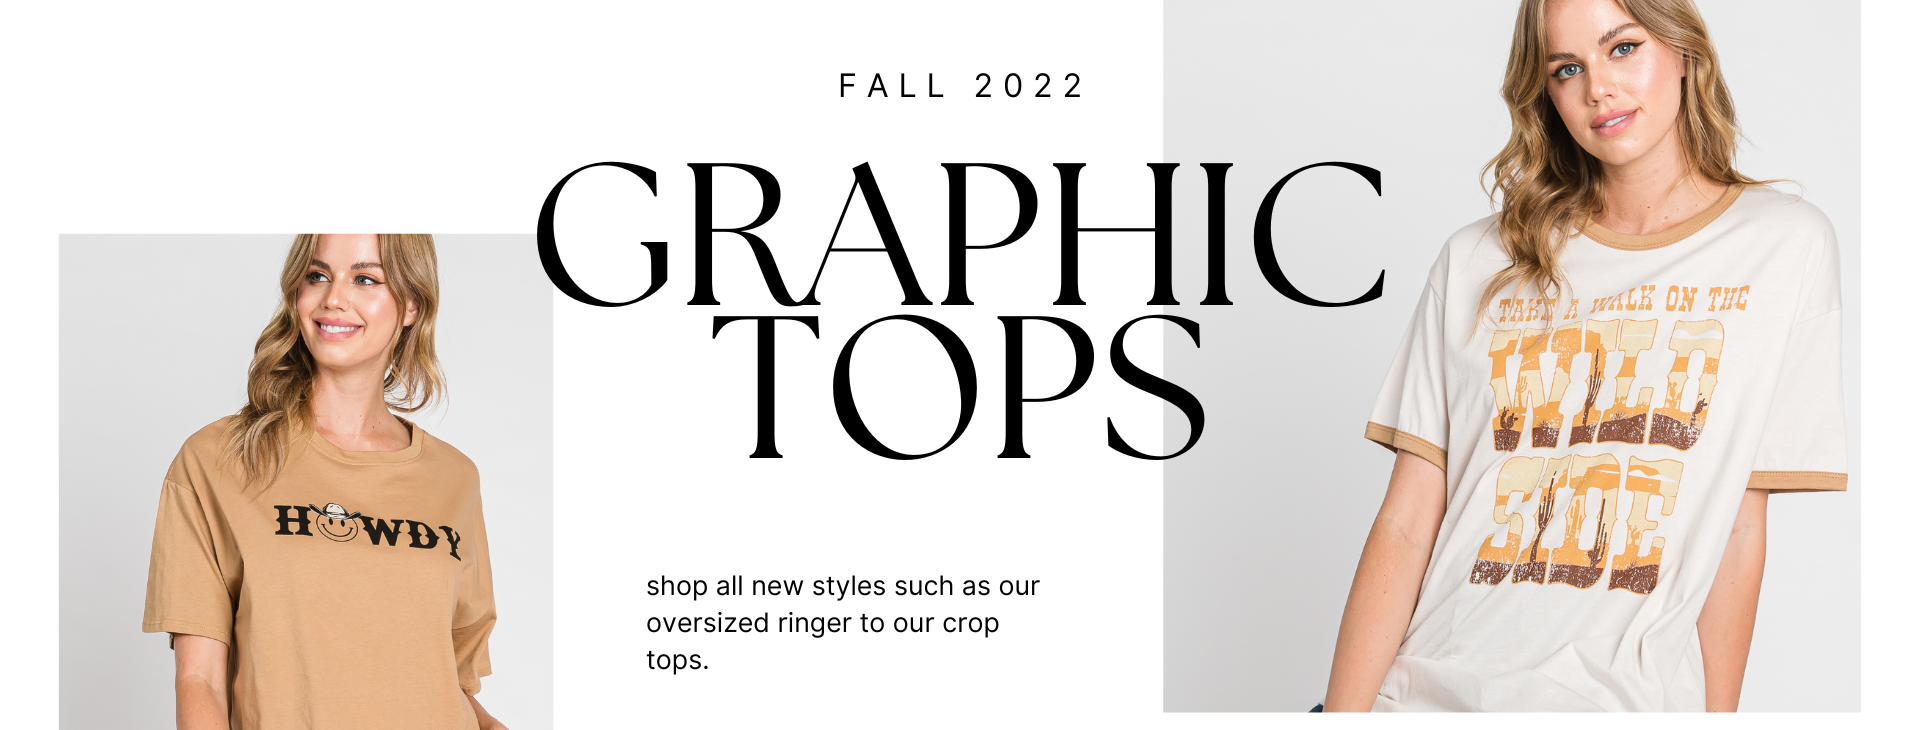 graphic tops 